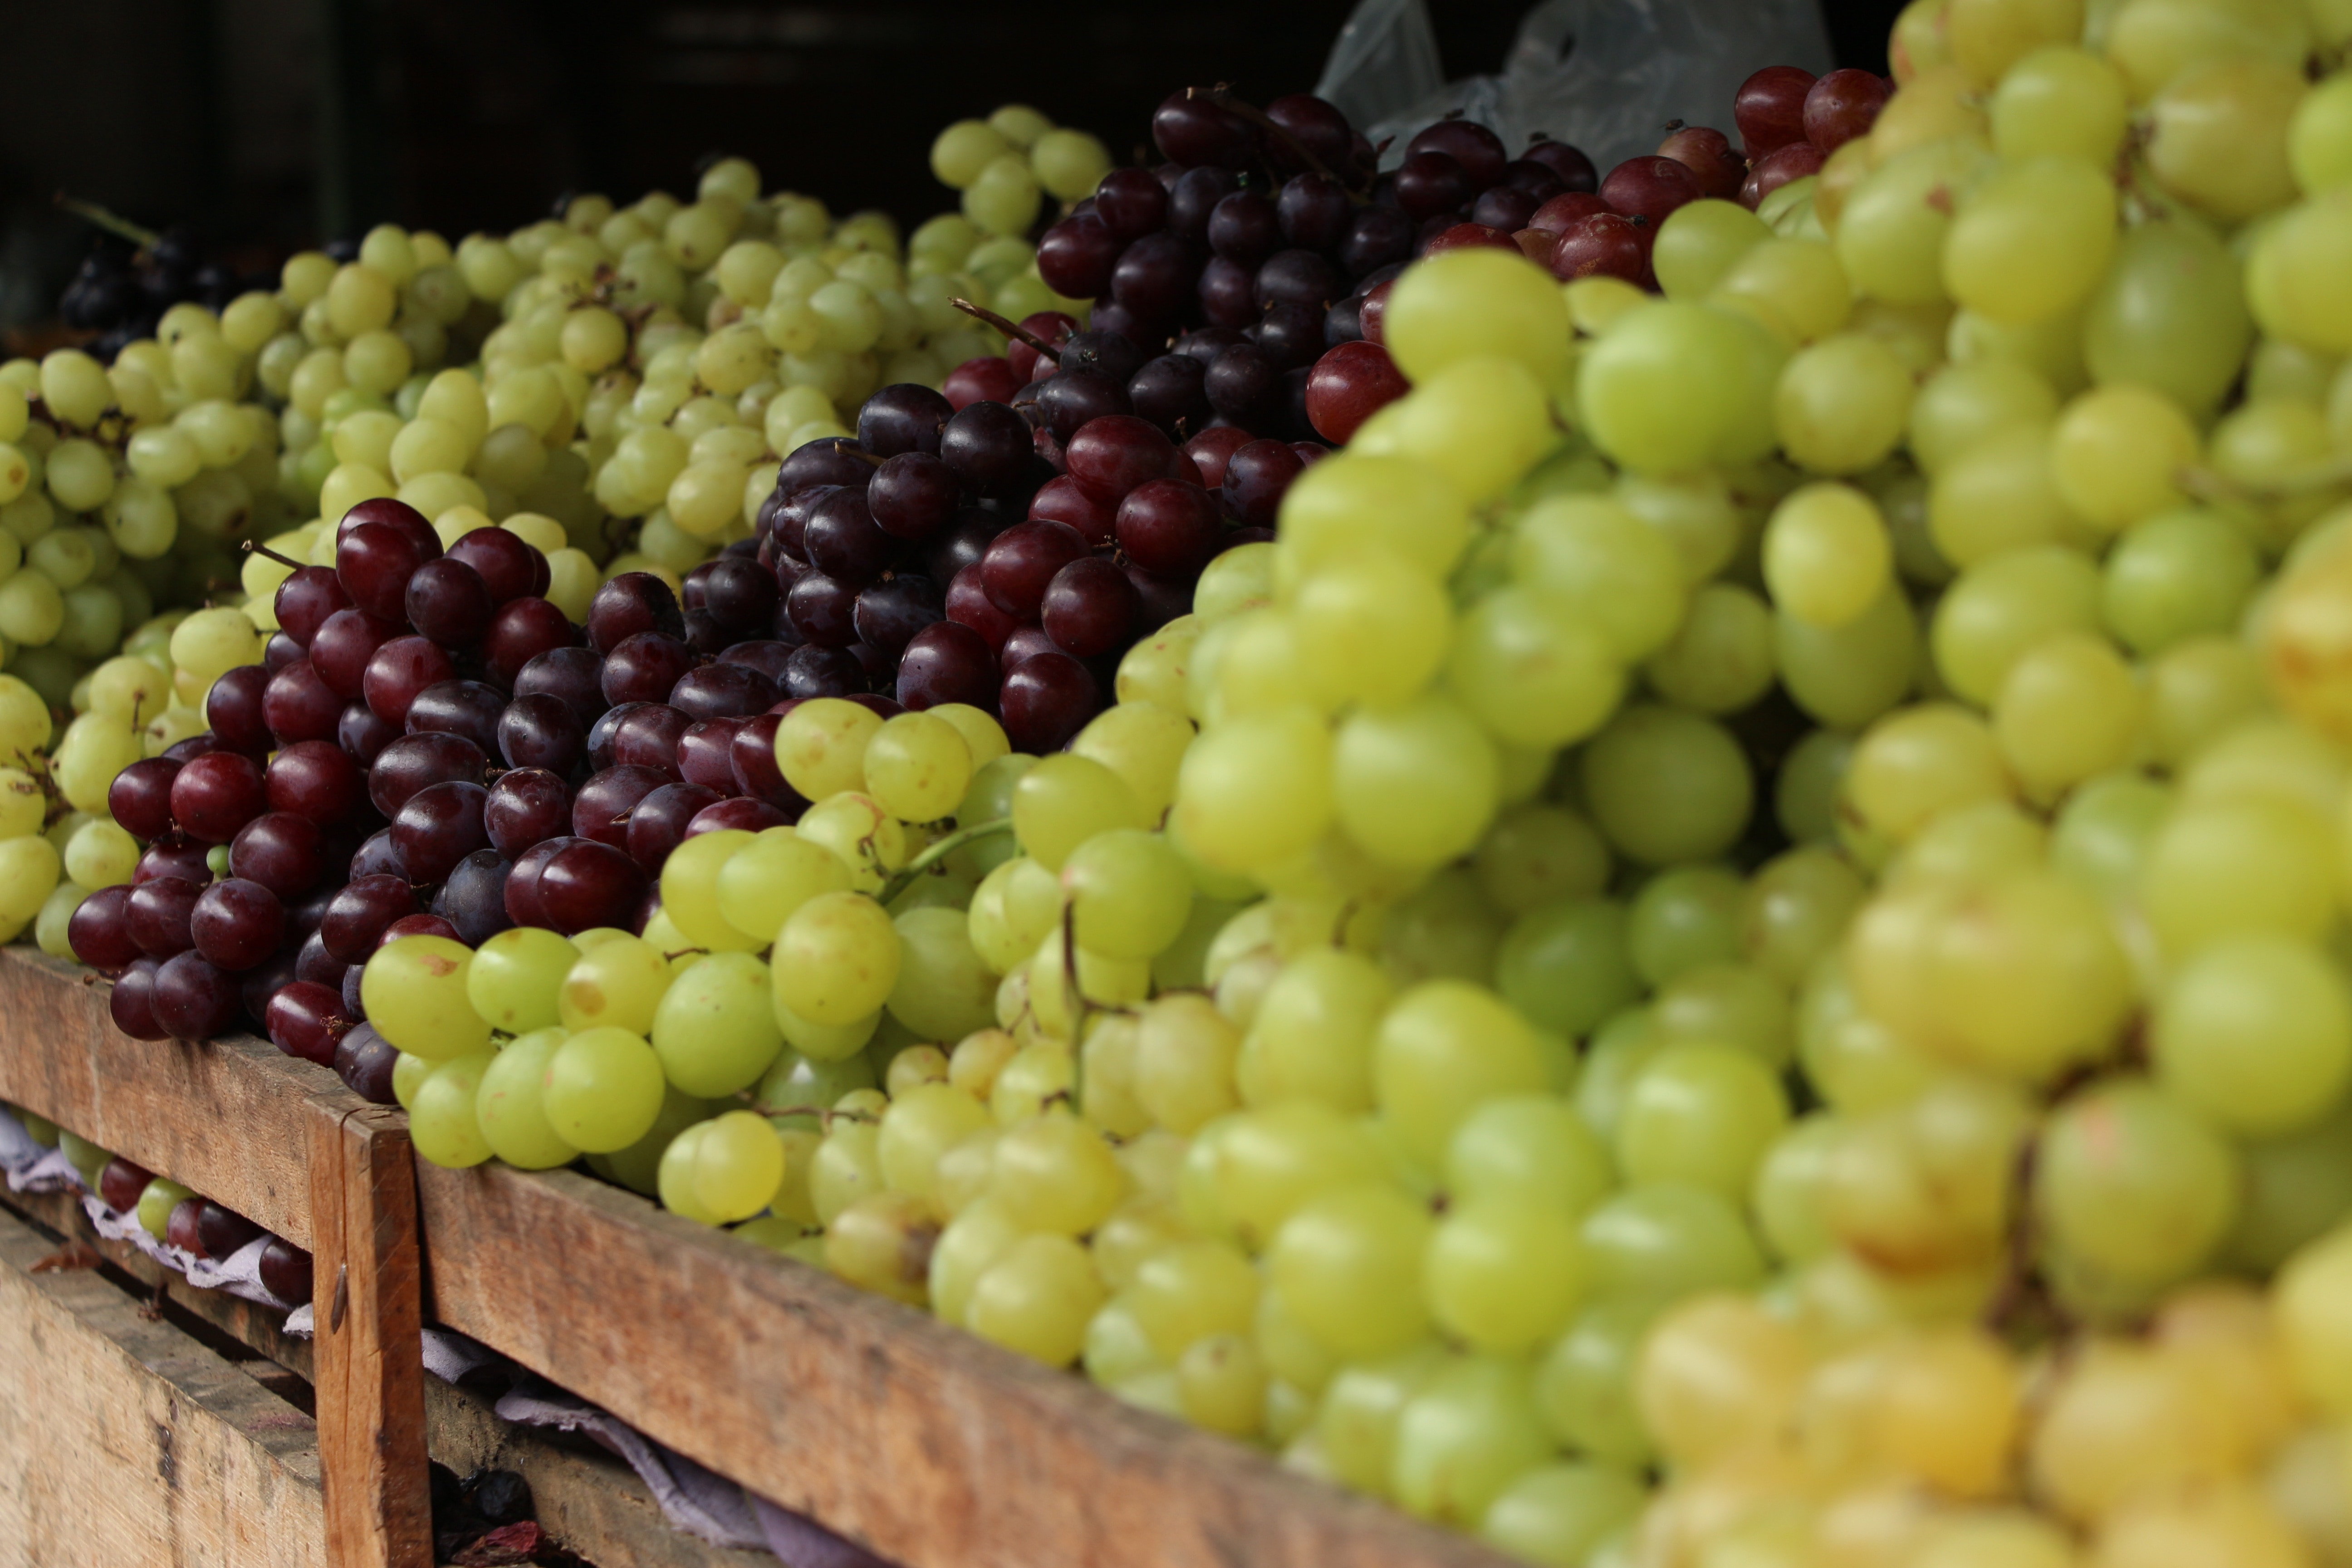 green and purple grapes fruit on display